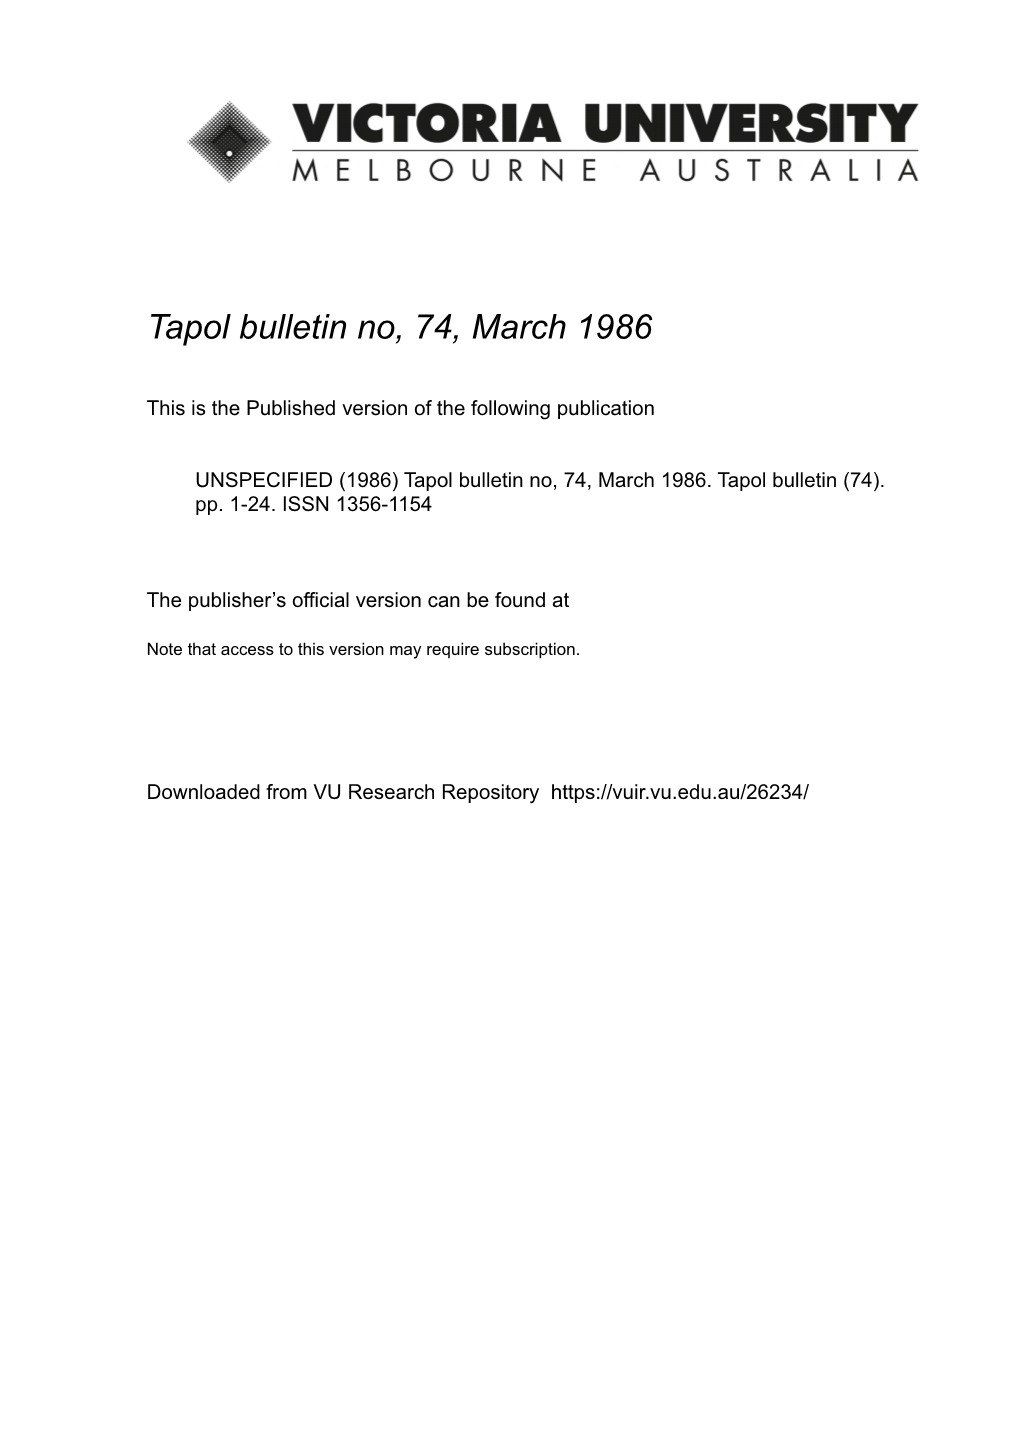 Tapol Bulletin No, 74, March 1986